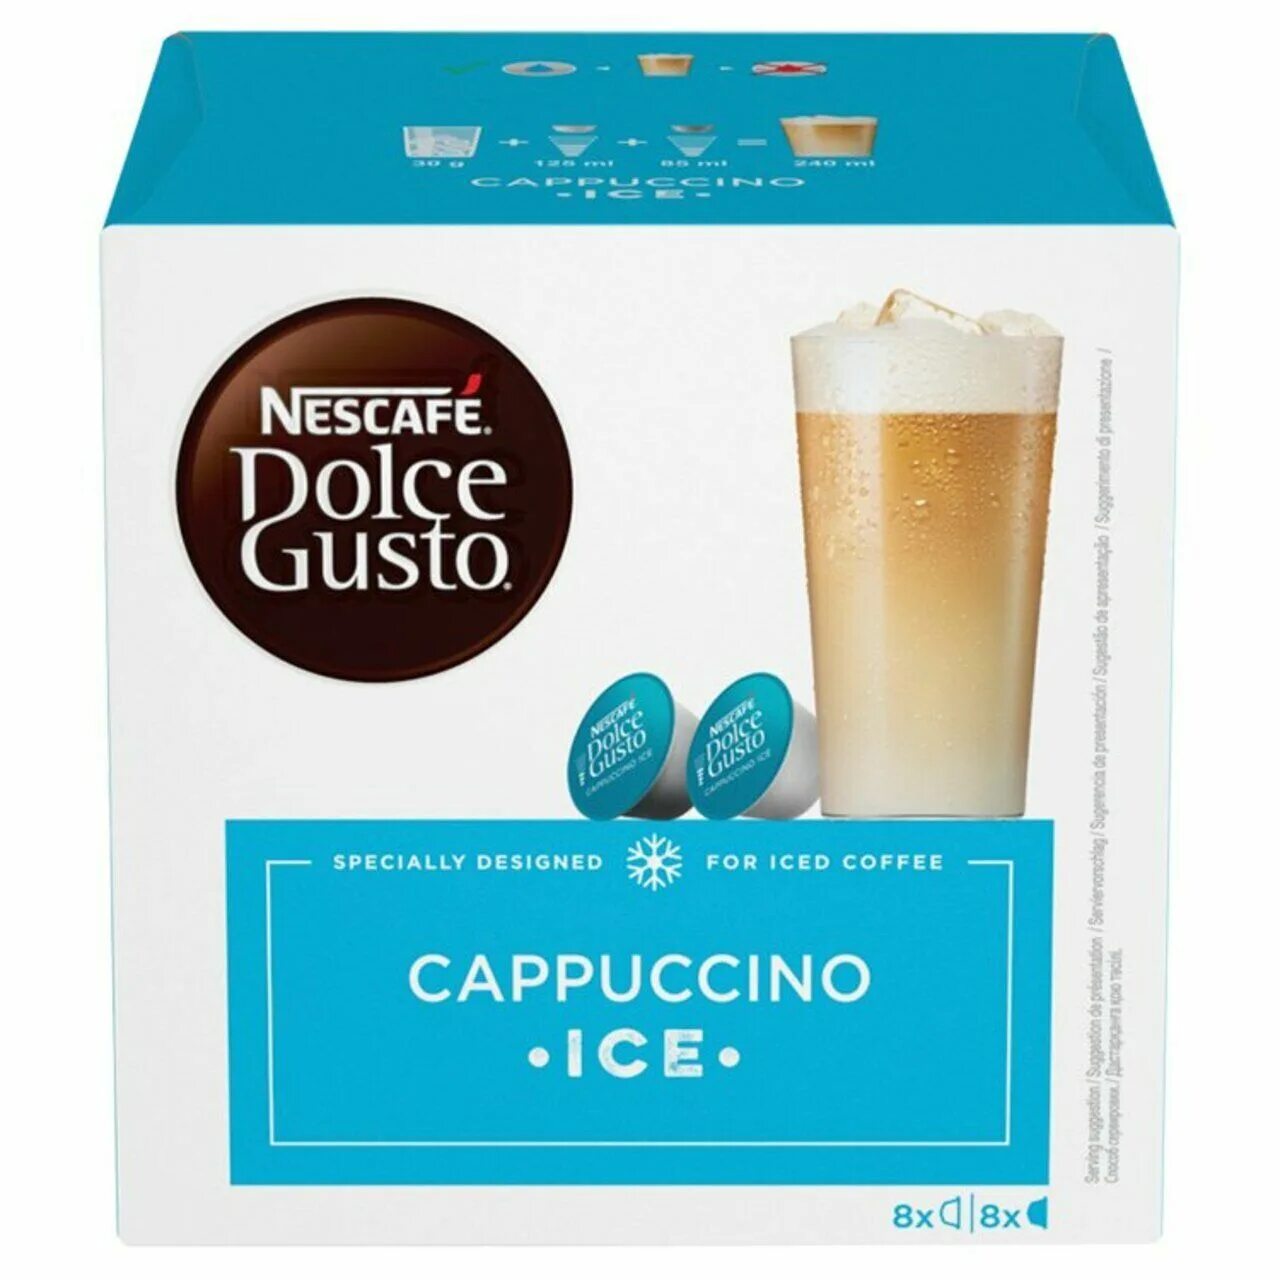 Капсулы Dolce gusto Cappuccino Ice. Dolce gusto капсулы Ice. Нескафе Дольче густо айс. Капсулы Дольче густо капучино айс. Dolce gusto cappuccino